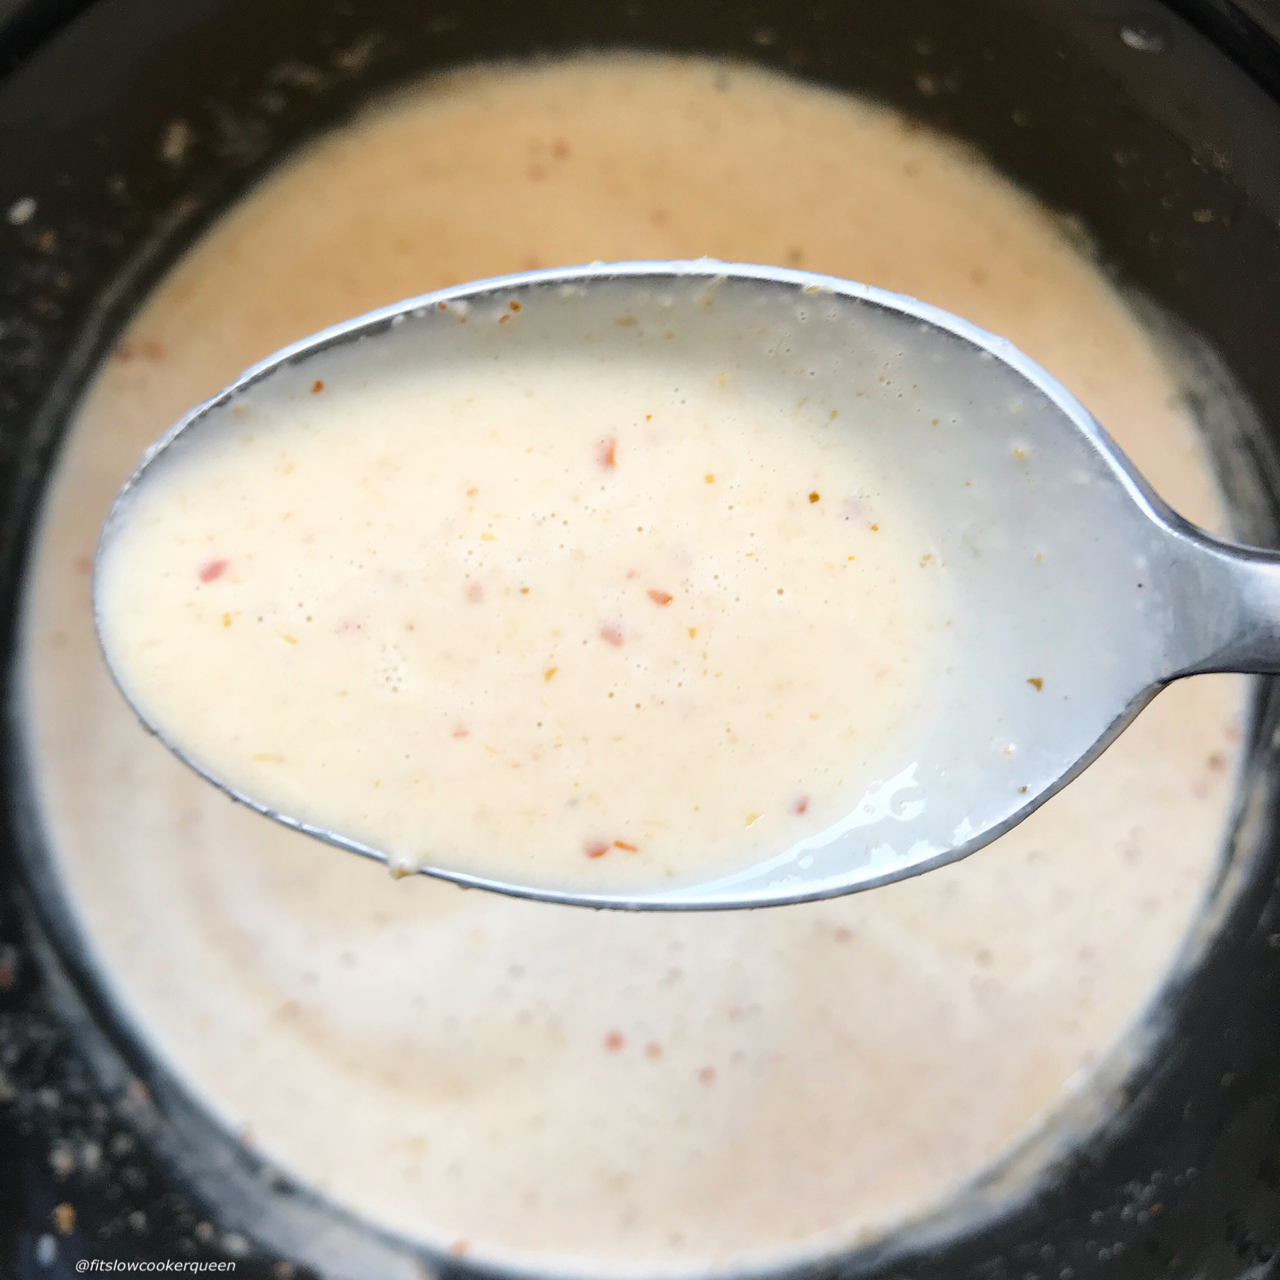 There are only 5 ingredients in the healthy and versatile coconut-curry sauce. Made in the slow cooker, in just a few hours you have a vegan, gluten-free, paleo, and whole30 sauce that you can use in so many different ways.